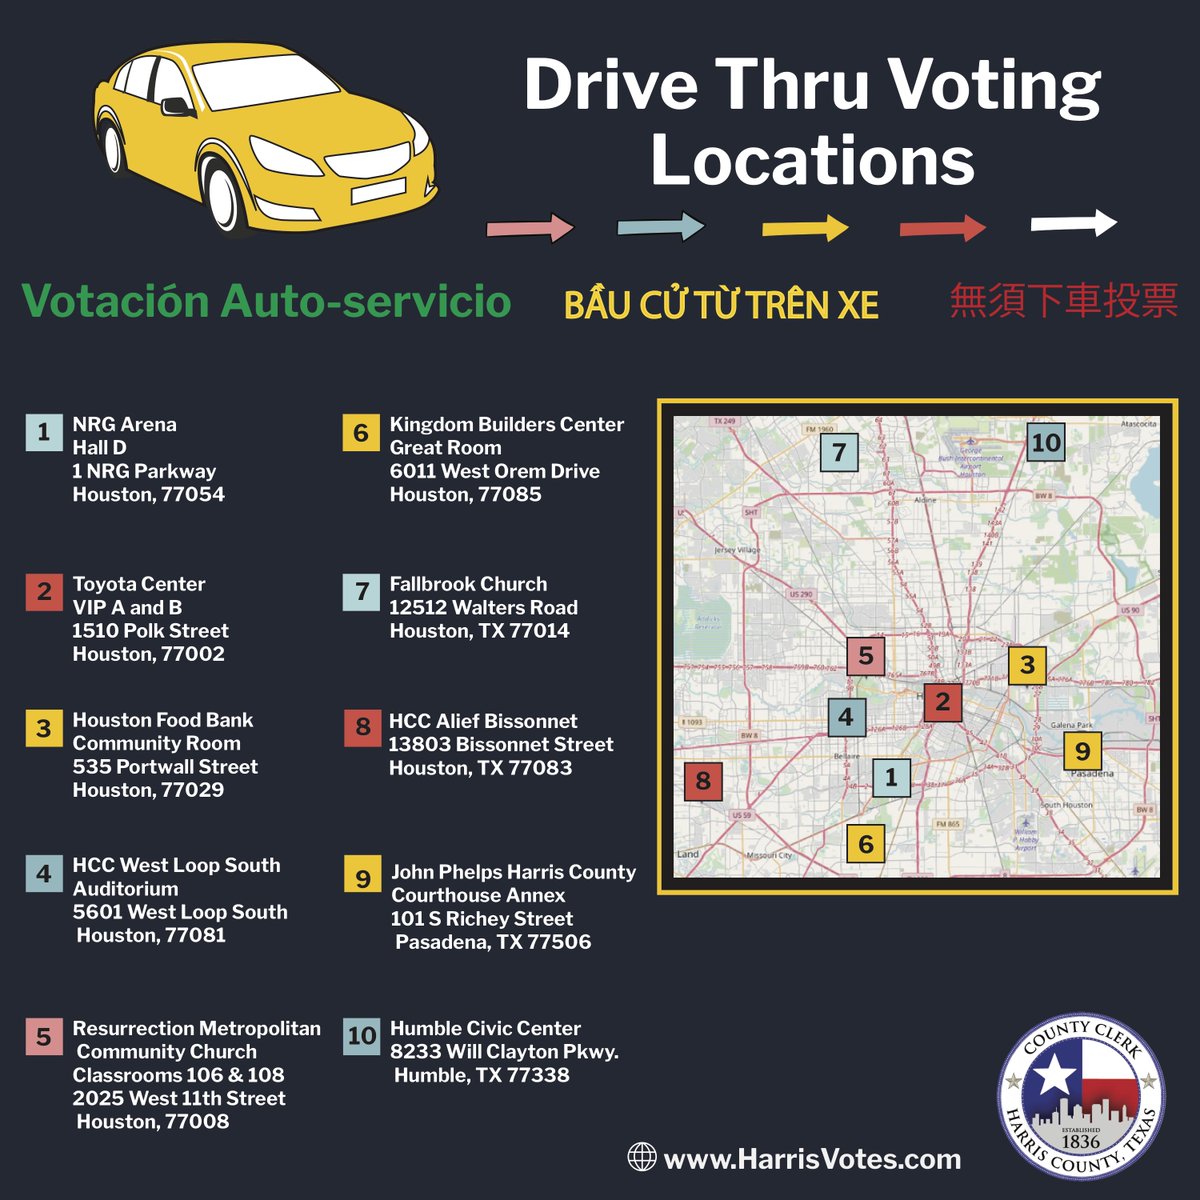 New for this year, we have added Drive-Thru Voting at 10 locations. They are for all voters to use.  http://HarrisVotes.com/DTV   #HarrisVotes